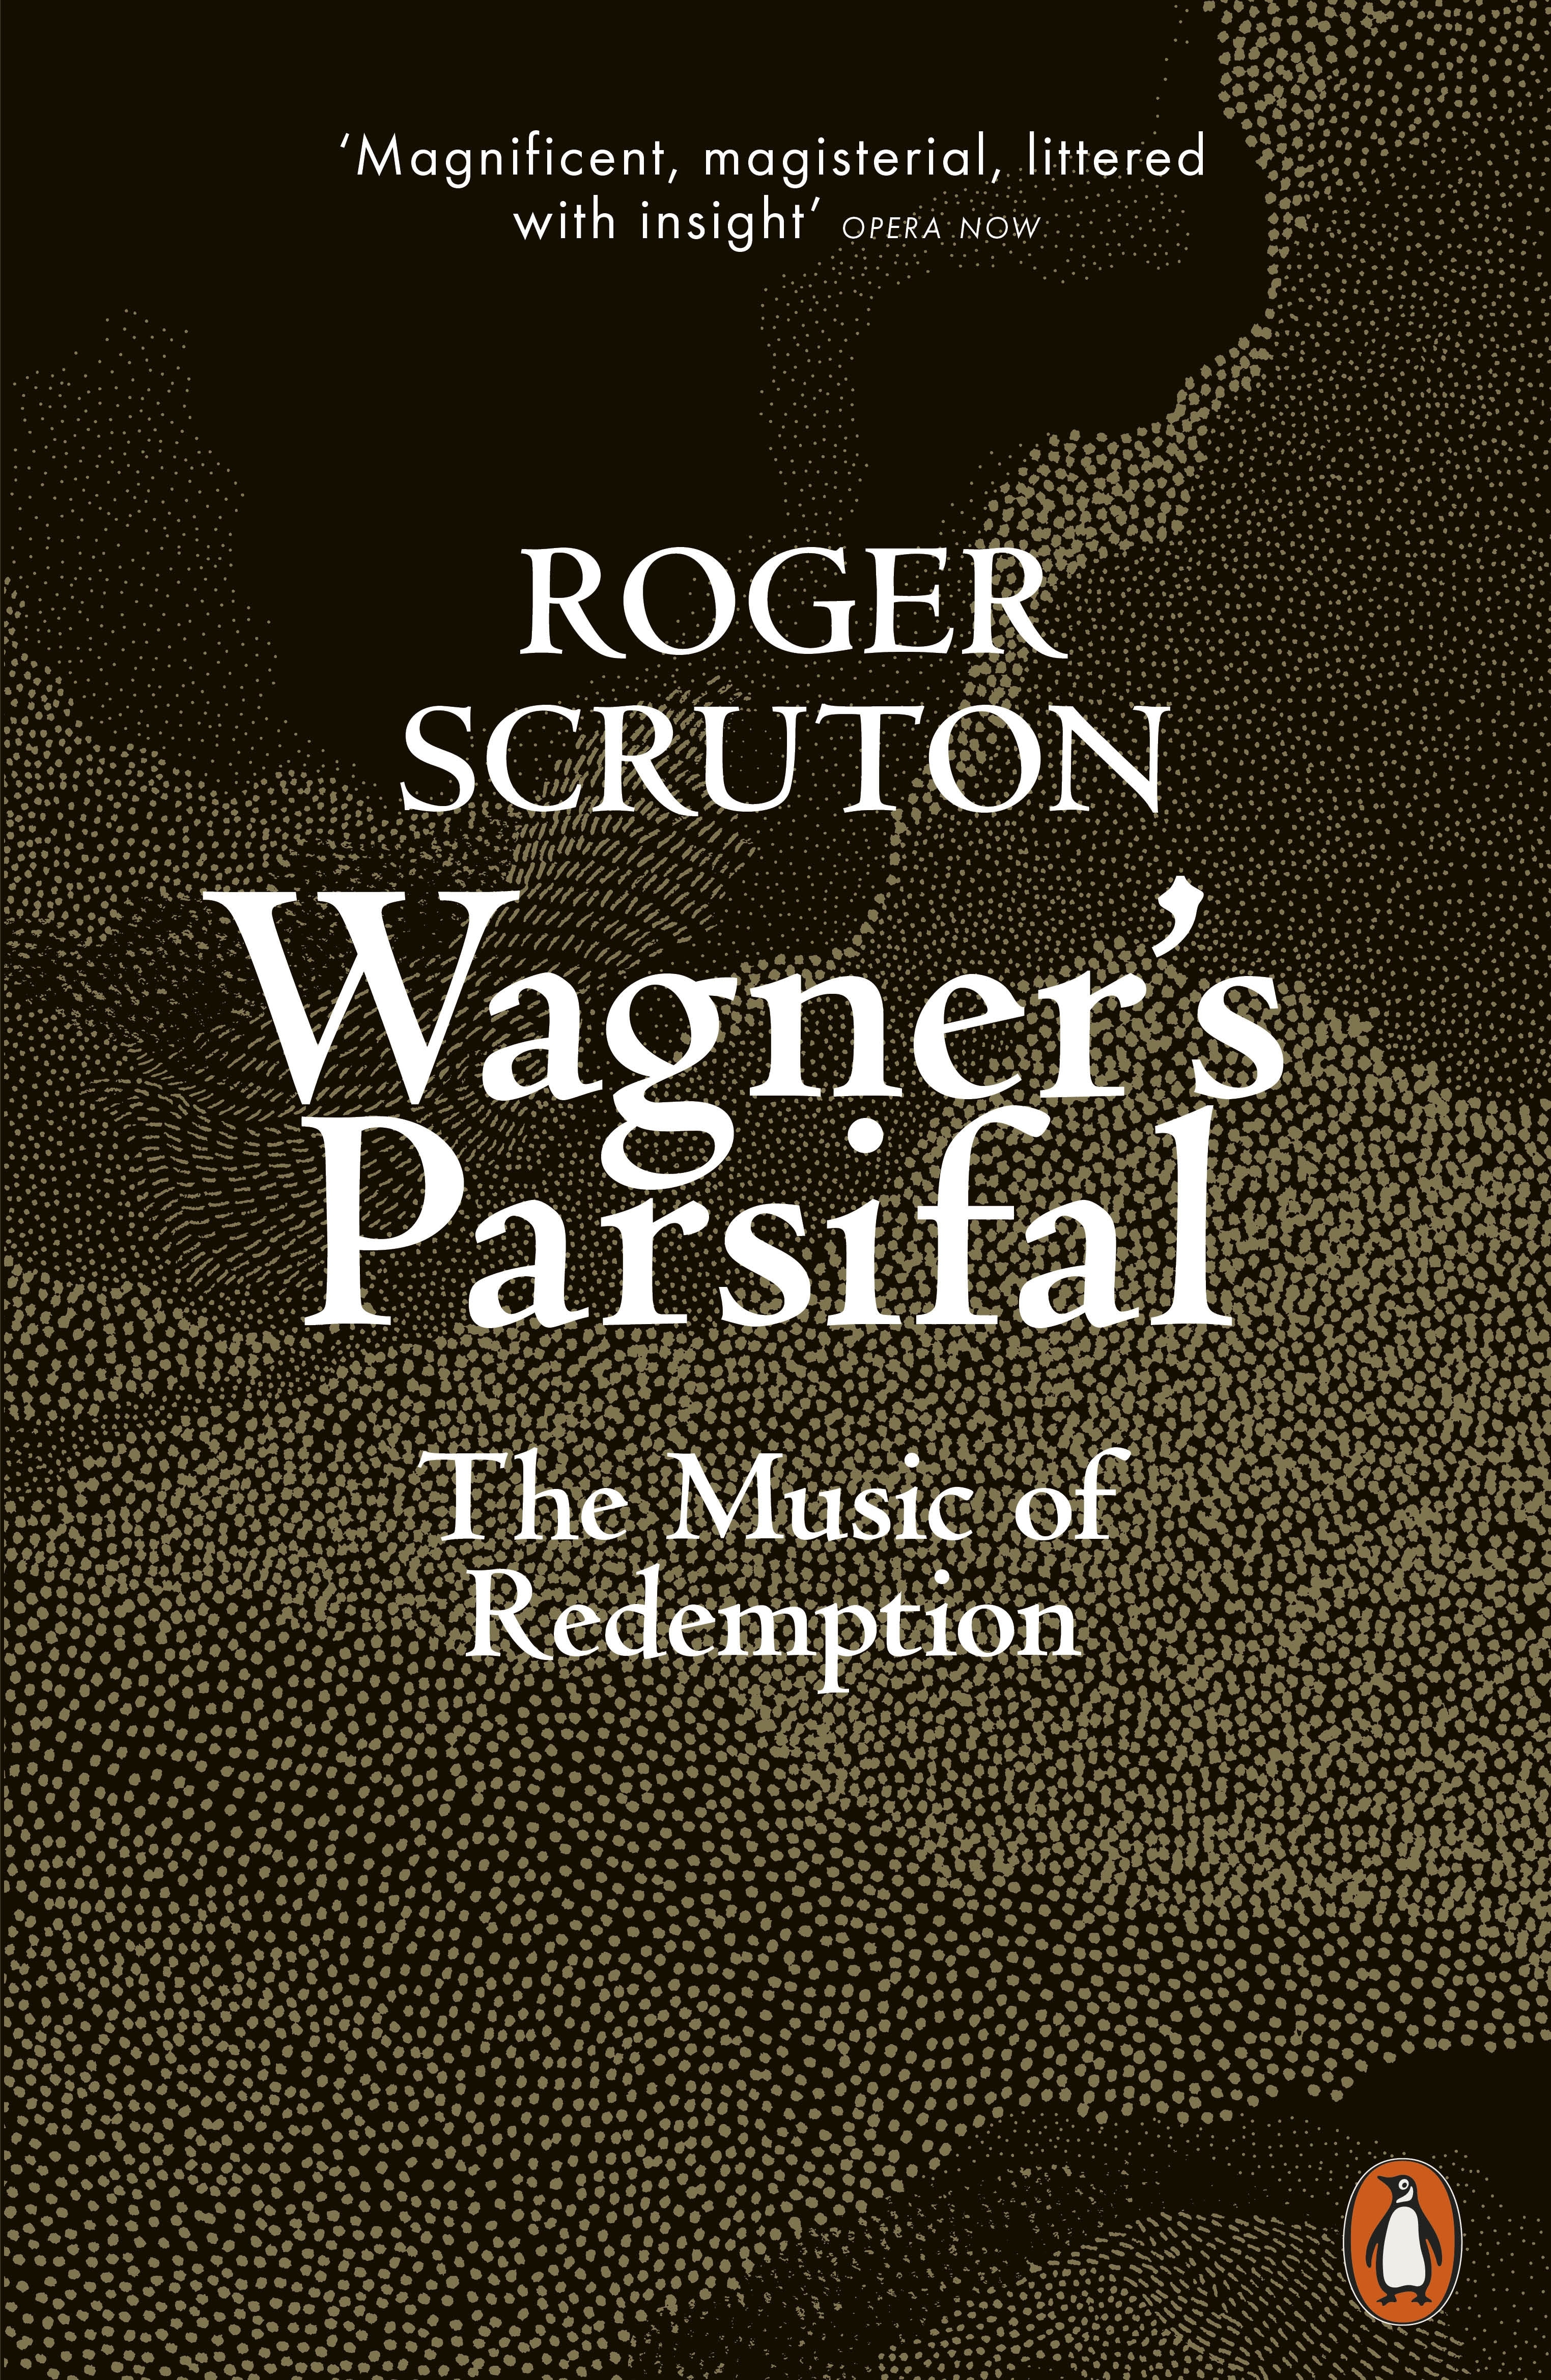 Book “Wagner's Parsifal” by Roger Scruton — March 25, 2021